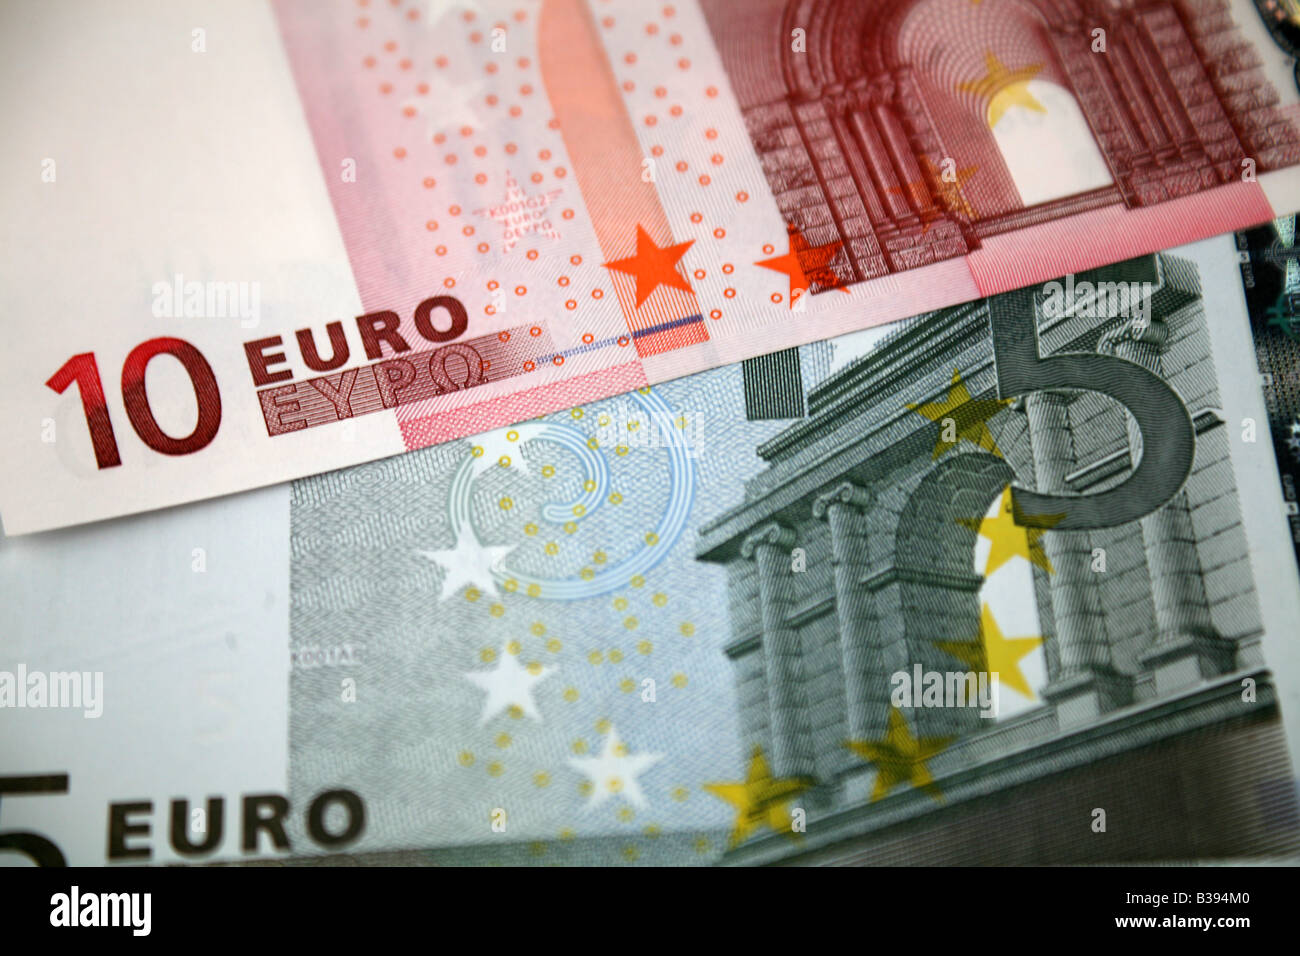 Euro Bank notes from Europe Stock Photo